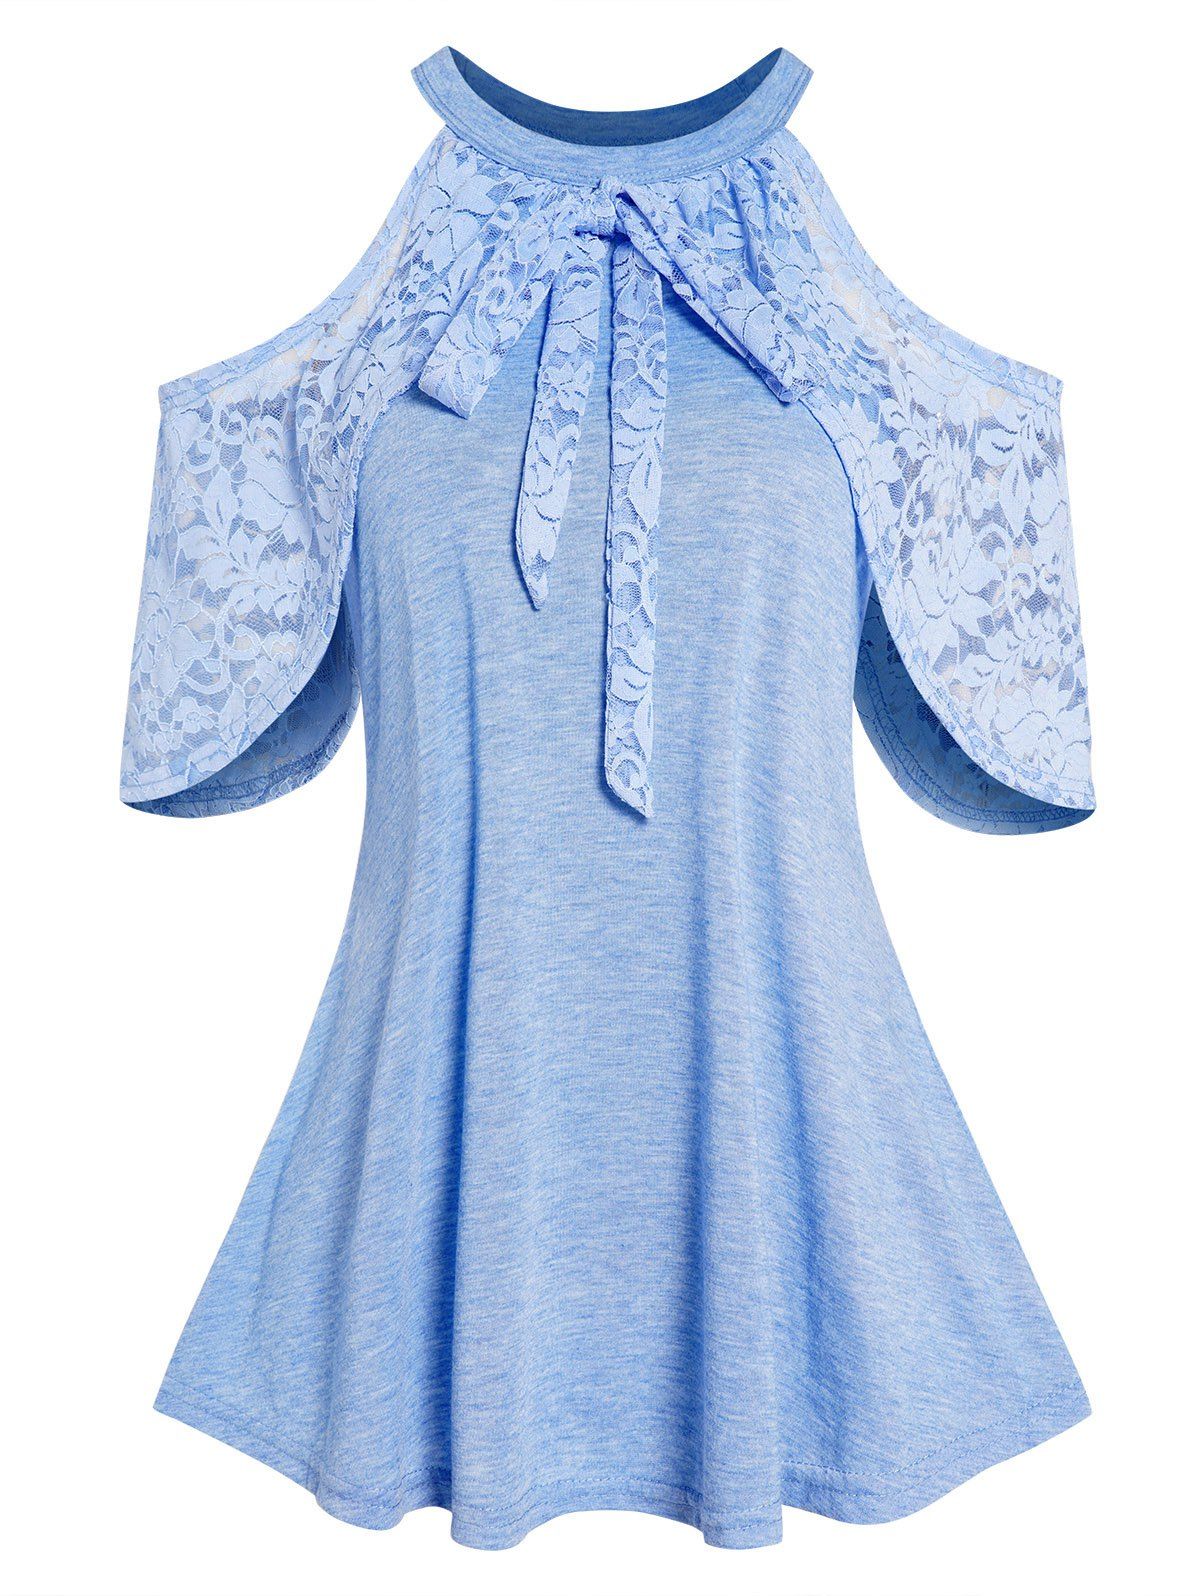 Cold Shoulder Lace Bowknot Top Short Sleeve Round Neck Casual Top - LIGHT BLUE XL